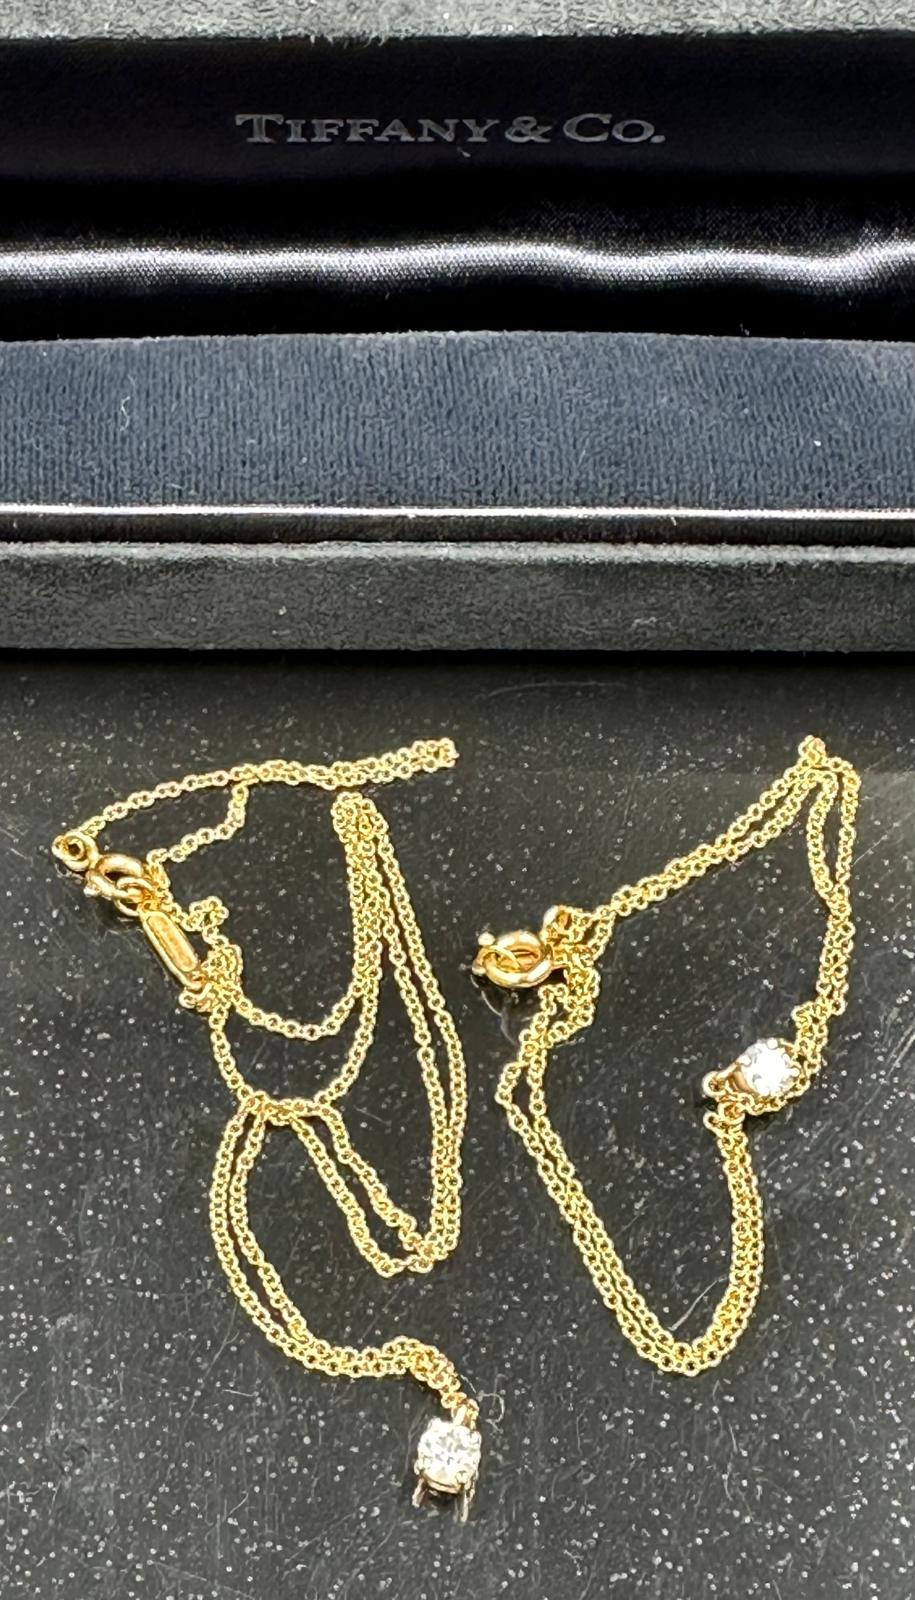 A fine chain necklace with diamond pendant signed Tiffany & Co. on 18ct yellow gold. Combined - Image 2 of 2